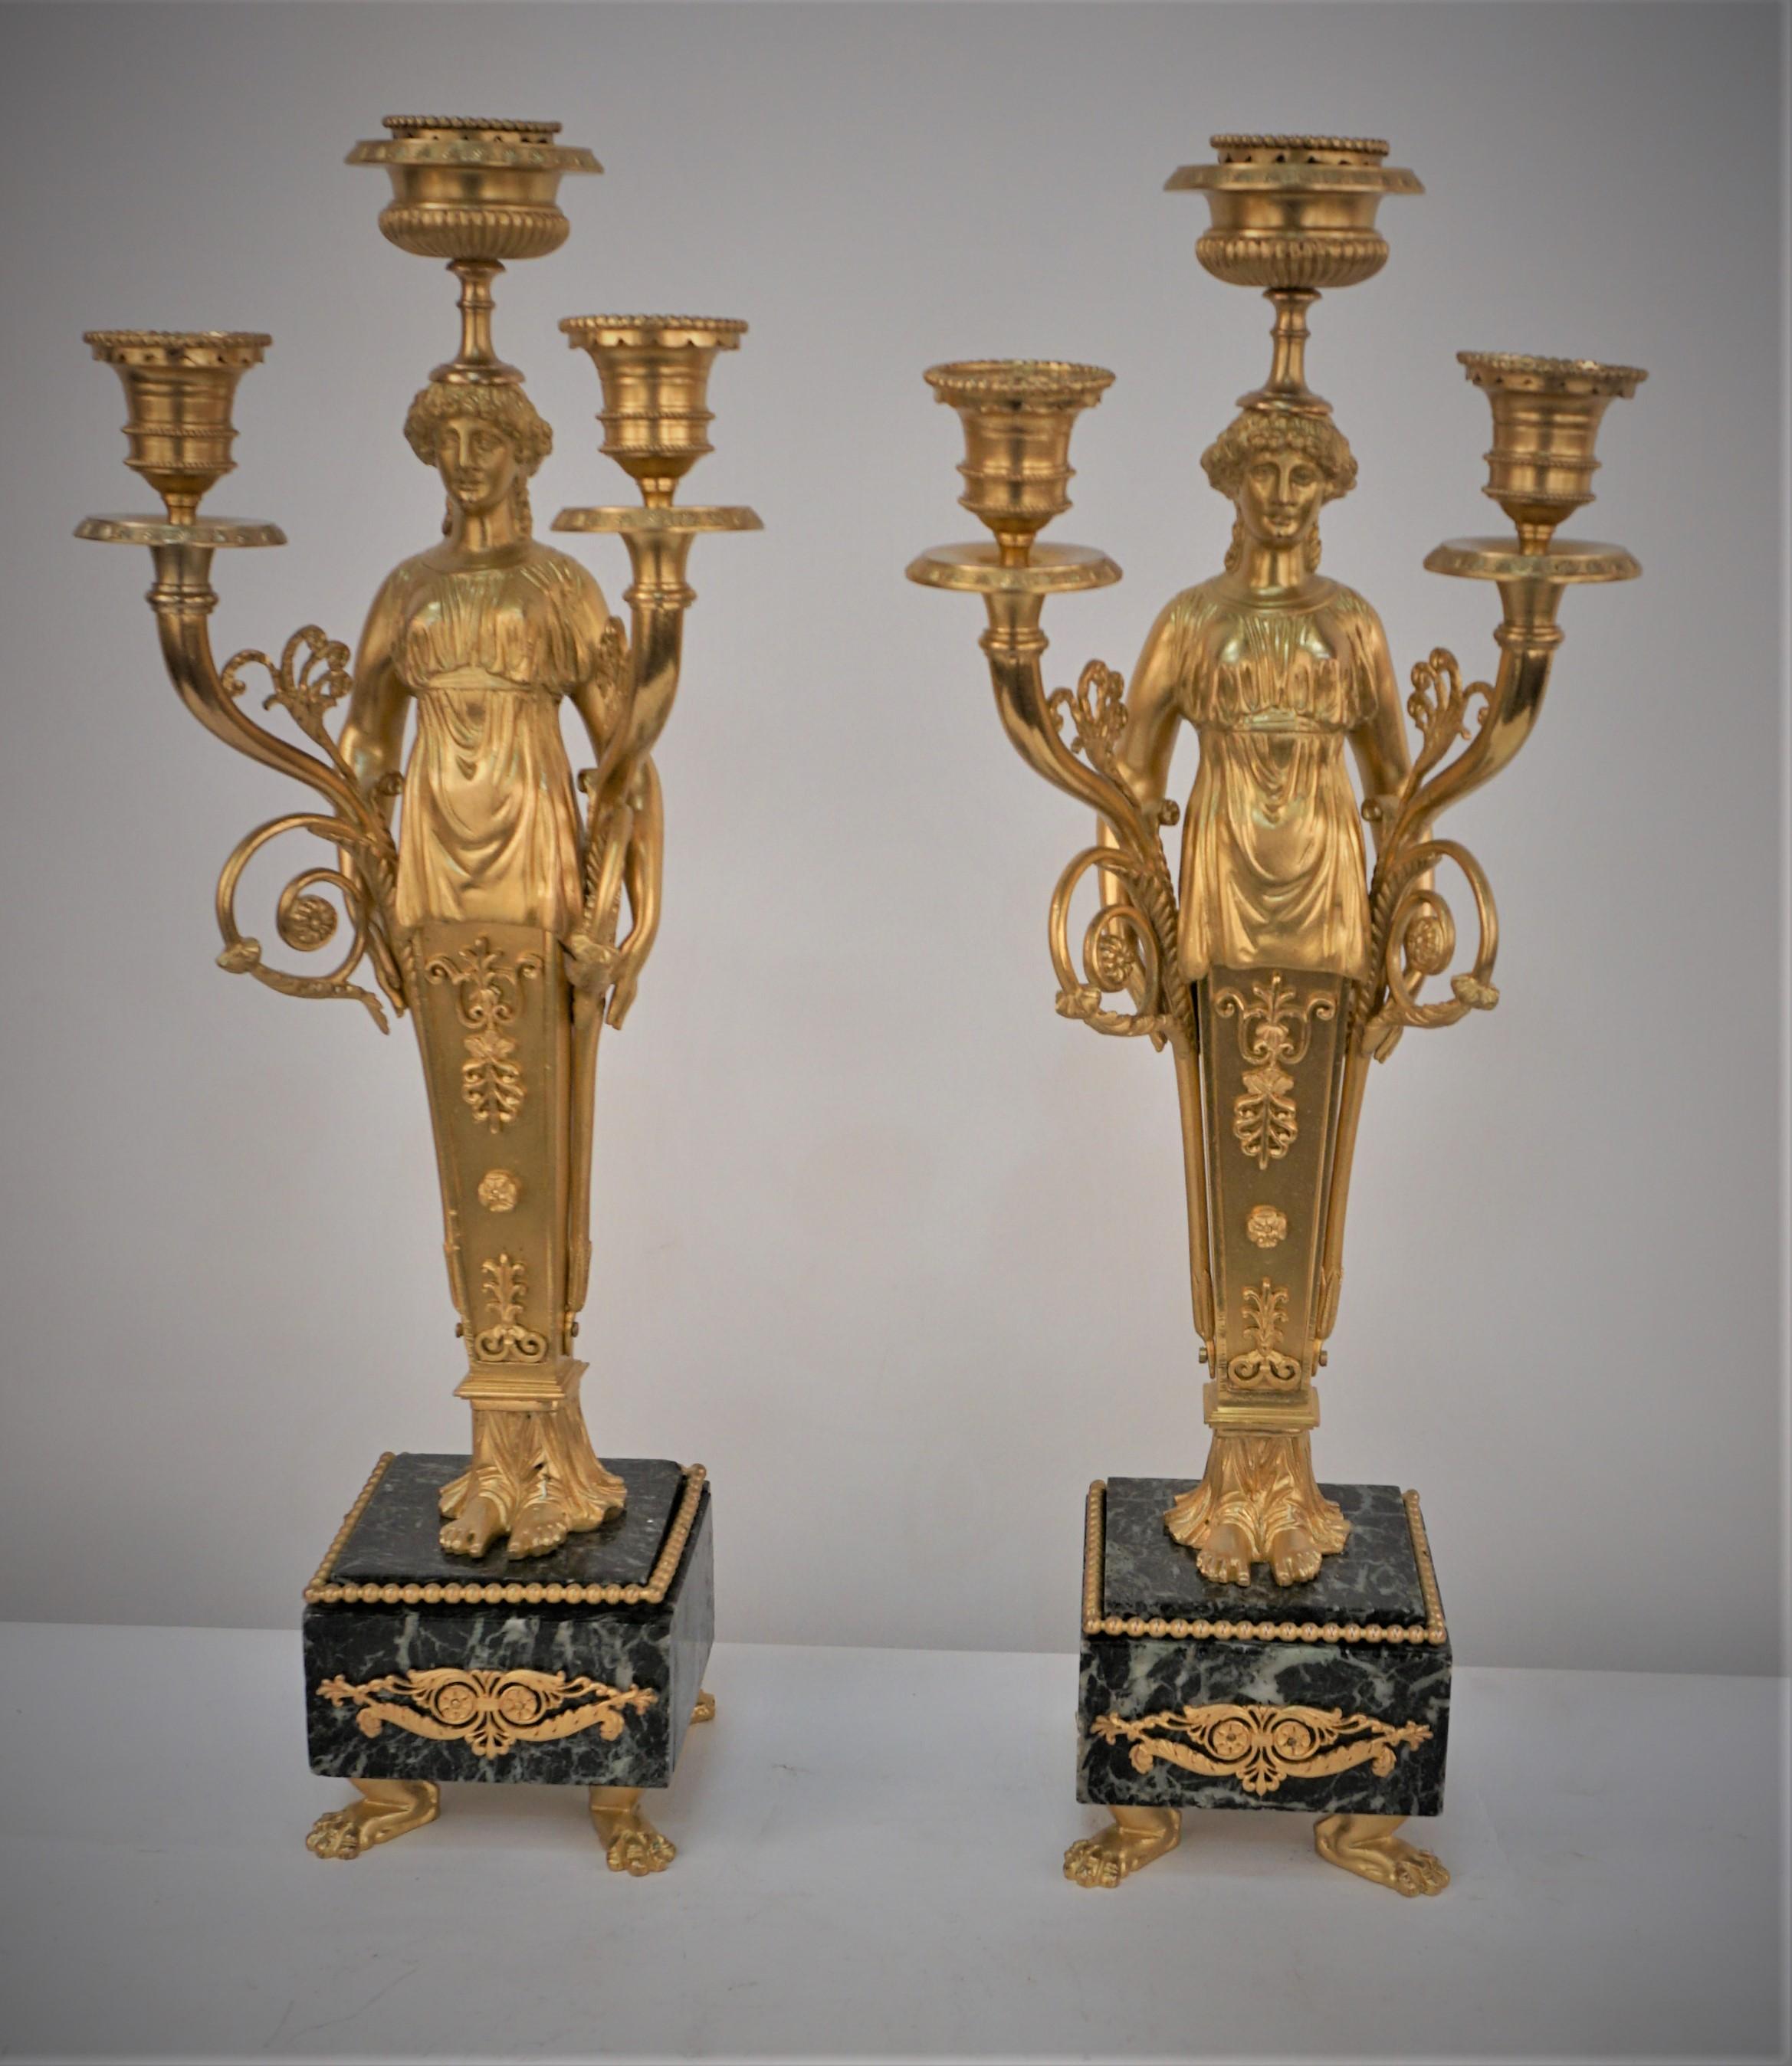 Late 19th Century French Empire Gilt Bronze Candelabra For Sale 1